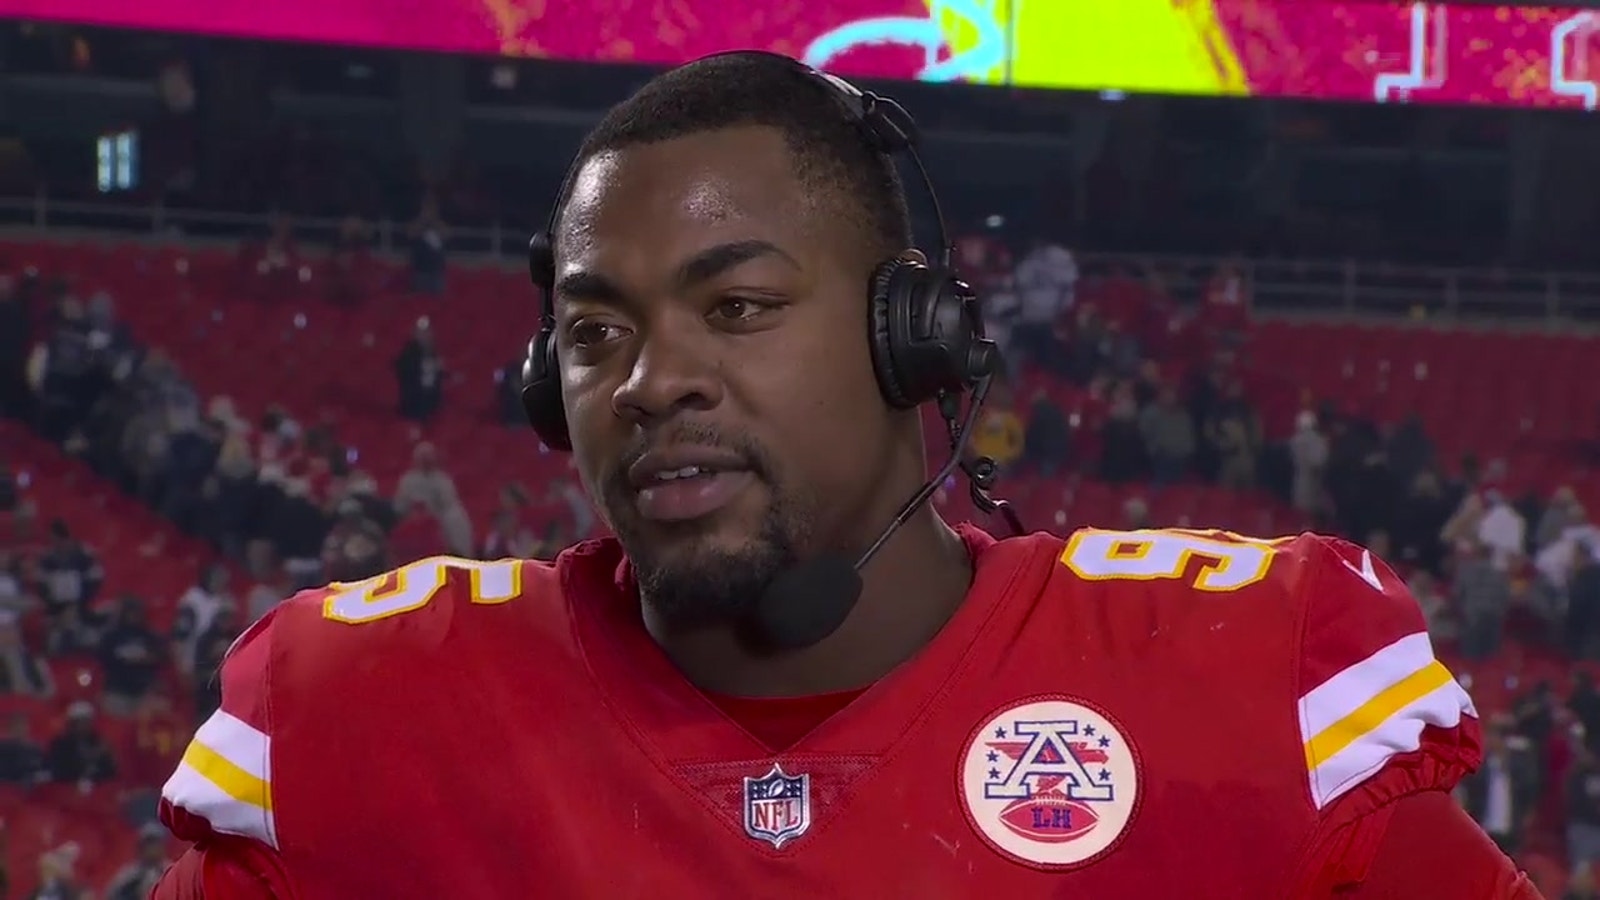 Chris Jones on Chiefs' stellar defensive performance: 'We played lights-out'